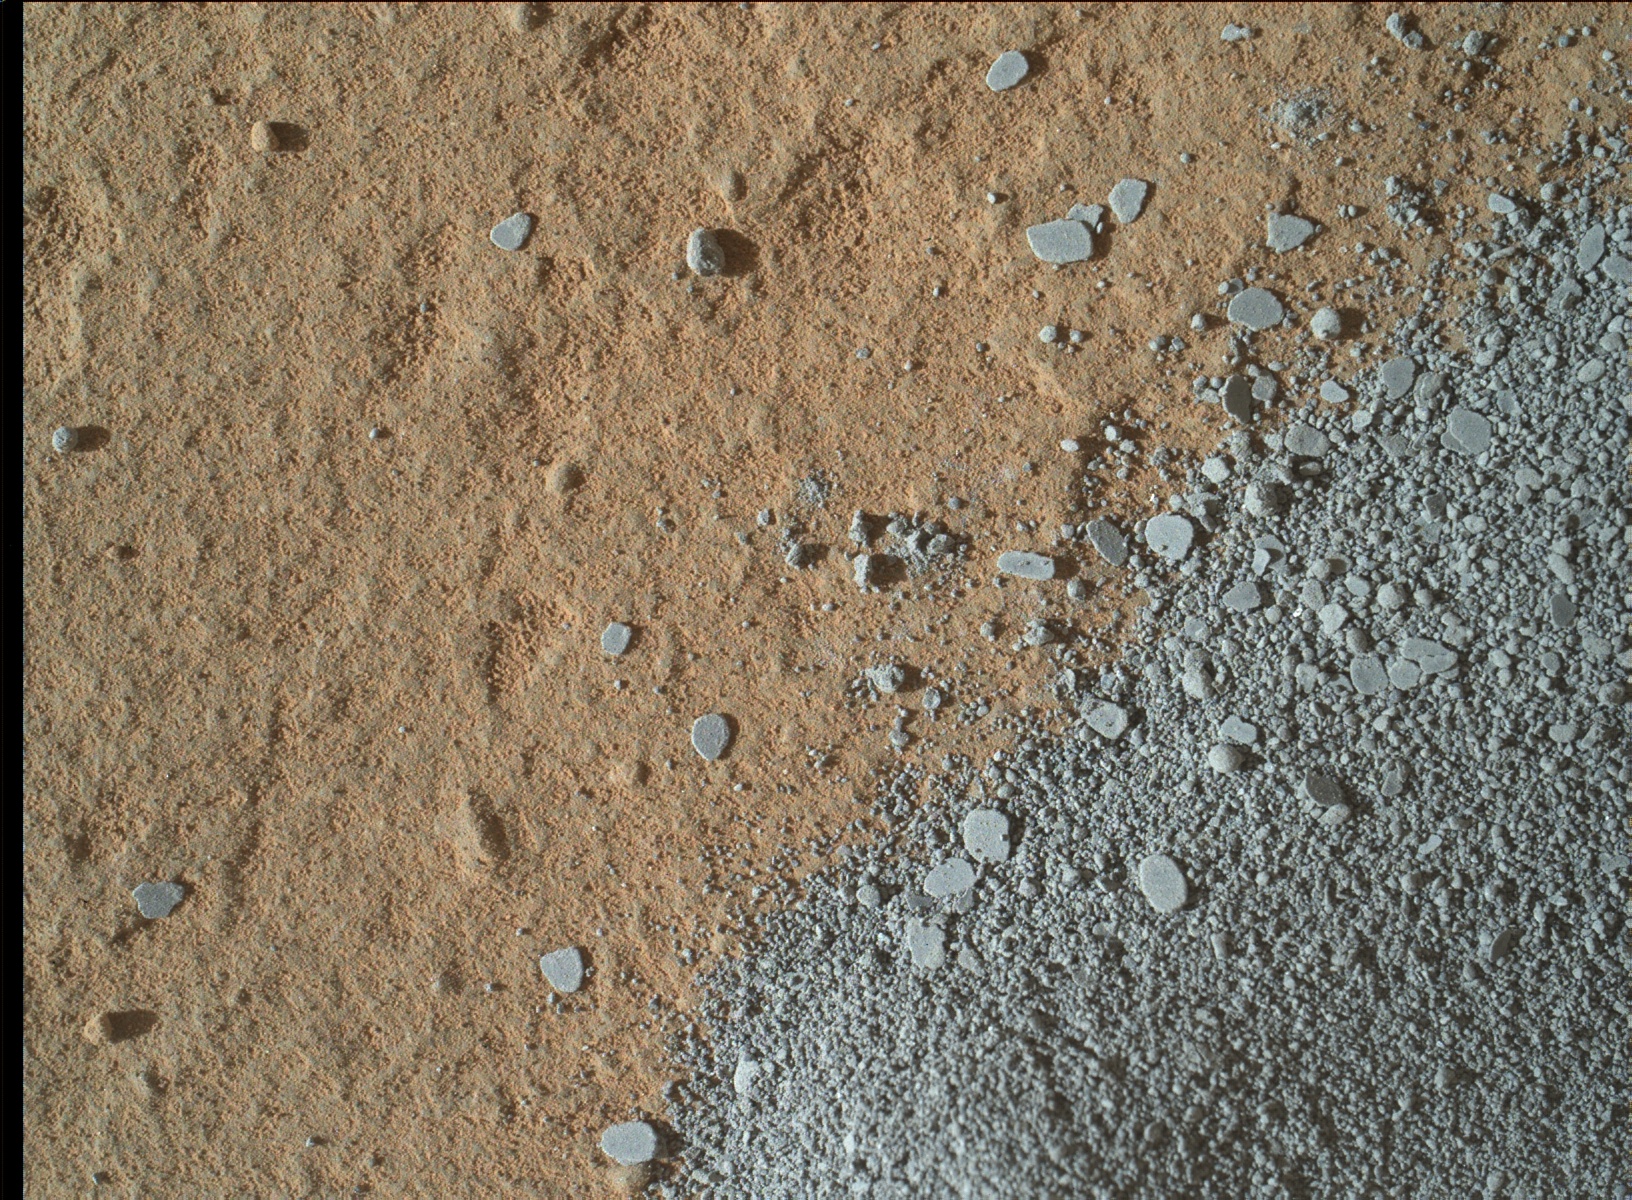 Nasa's Mars rover Curiosity acquired this image using its Mars Hand Lens Imager (MAHLI) on Sol 1124